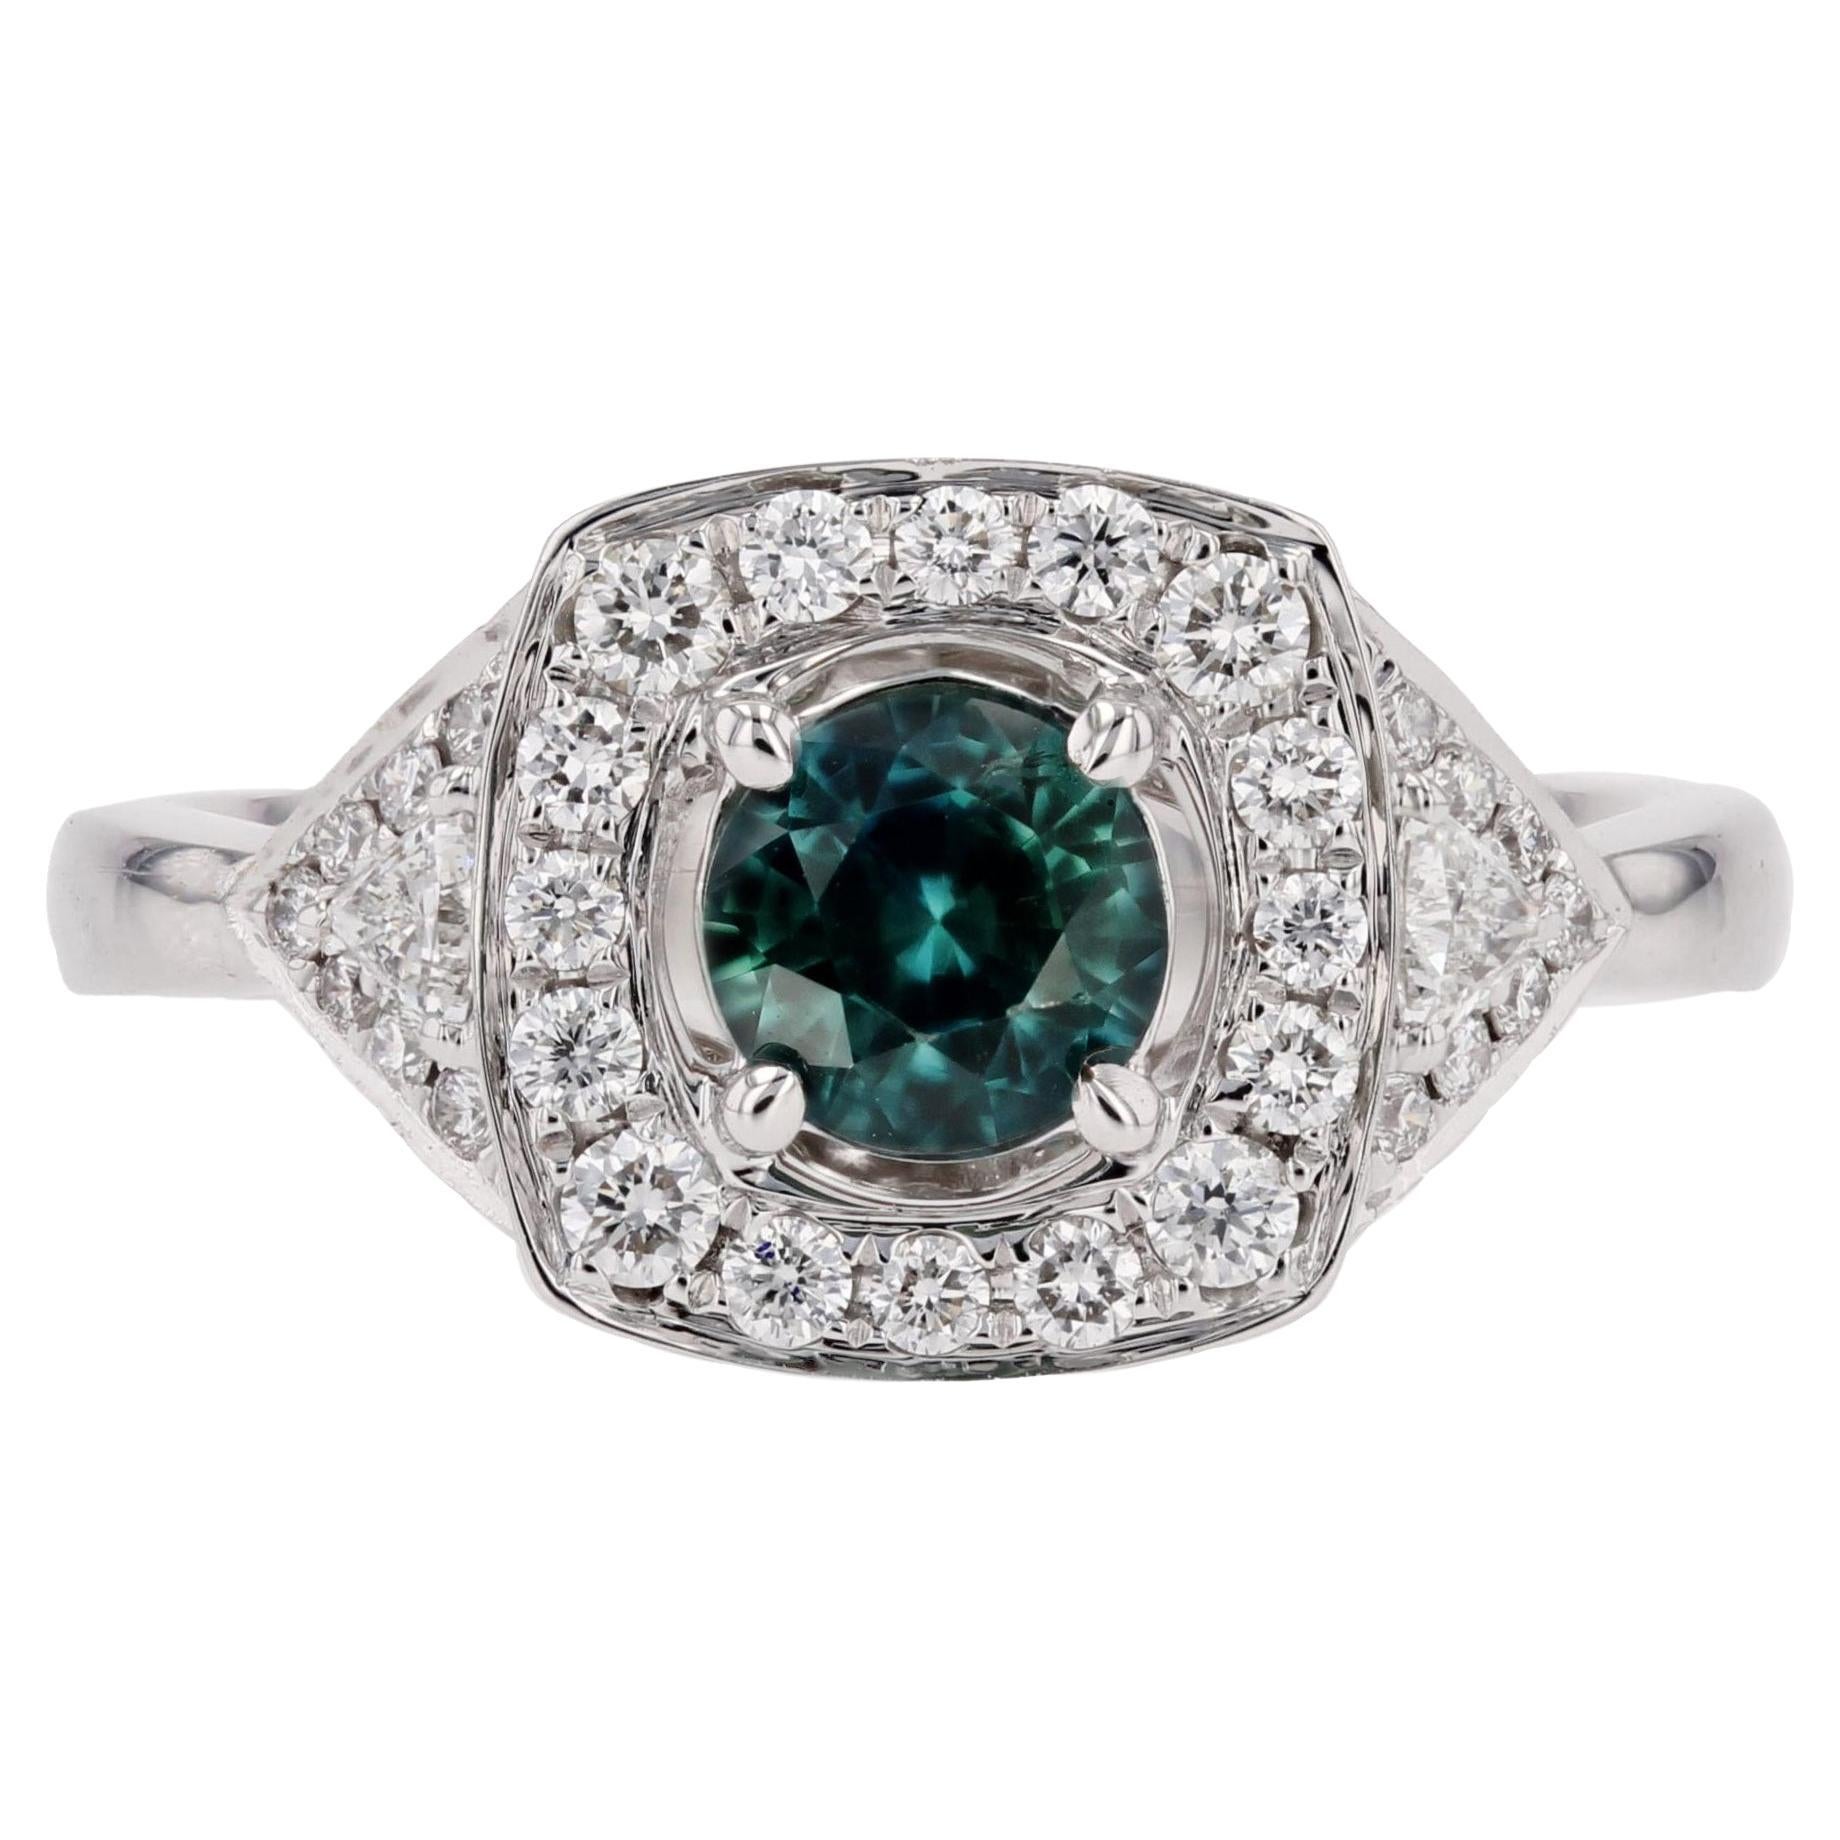 New Art Deco Style Teal Sapphire Diamonds 18 Karat White Gold Cluster Ring For Sale